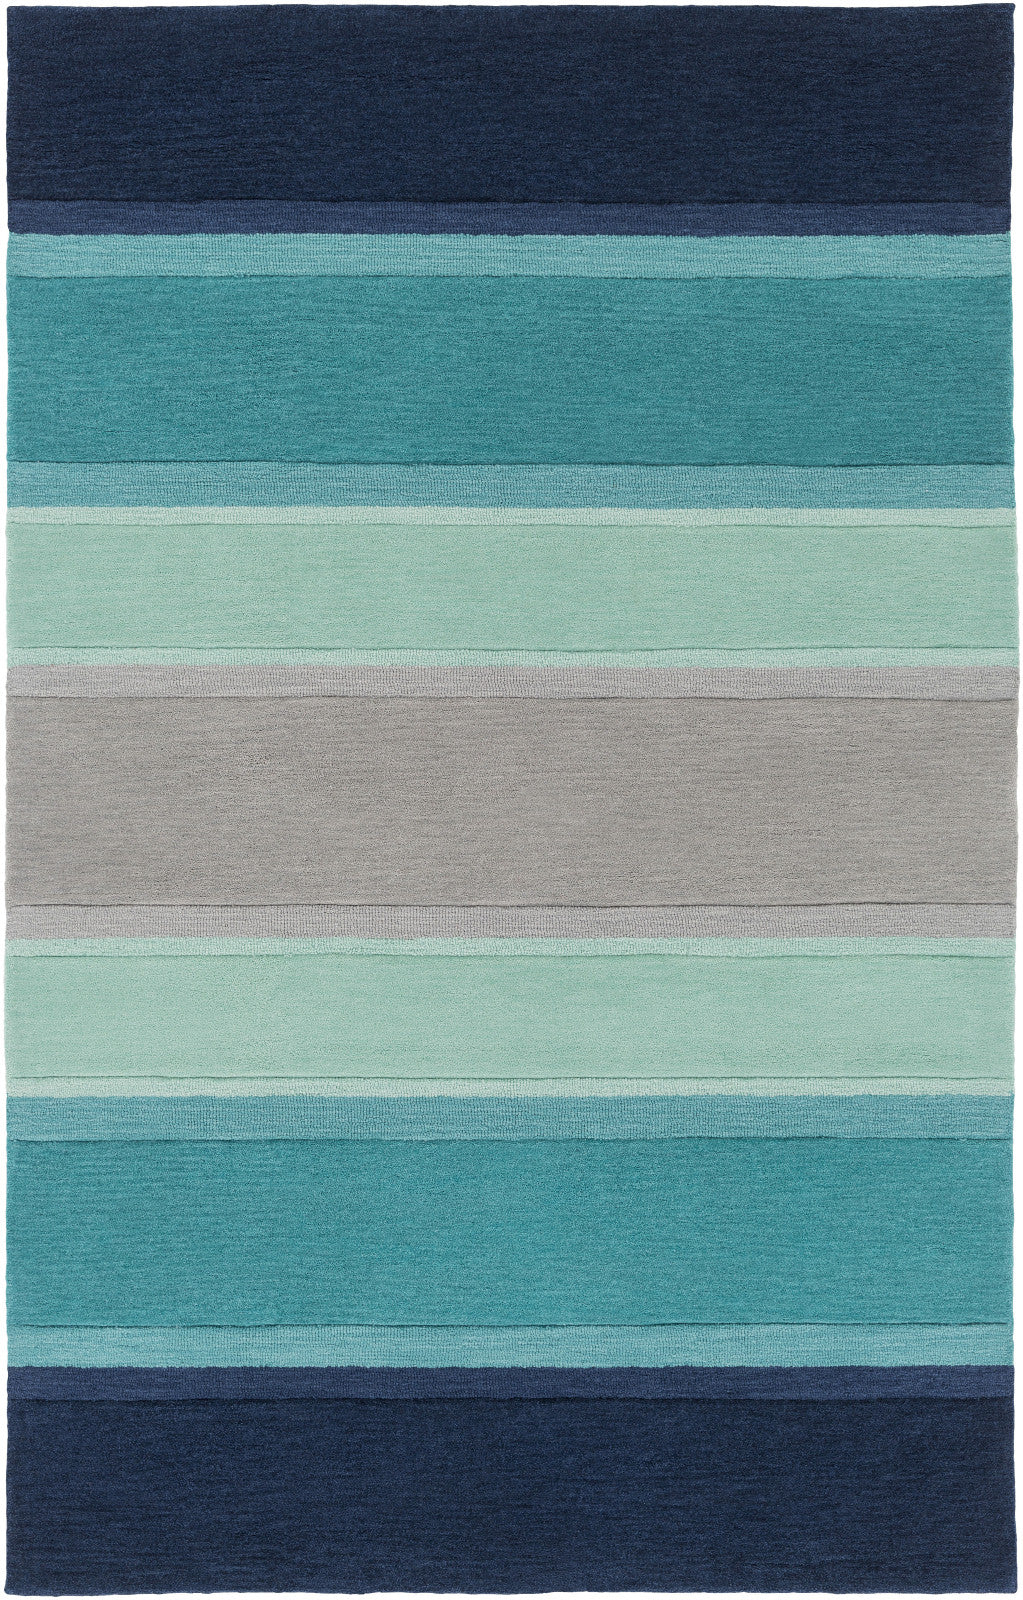 Artistic Weavers Holden Olive Turquoise/Navy Blue Area Rug main image